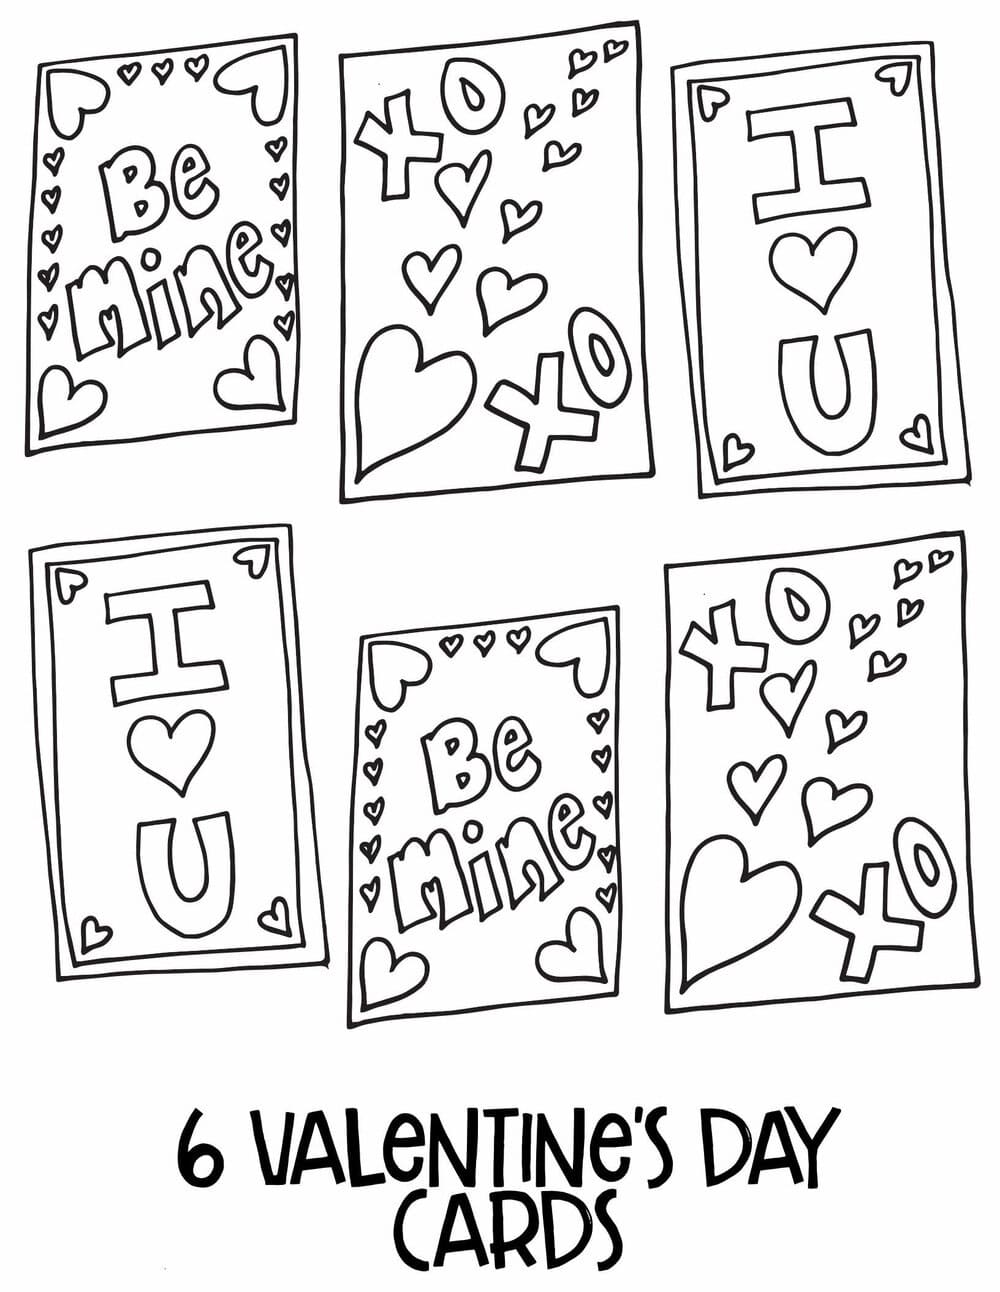 Valentine's Day Cards Coloring Page   Free Printable Coloring ...